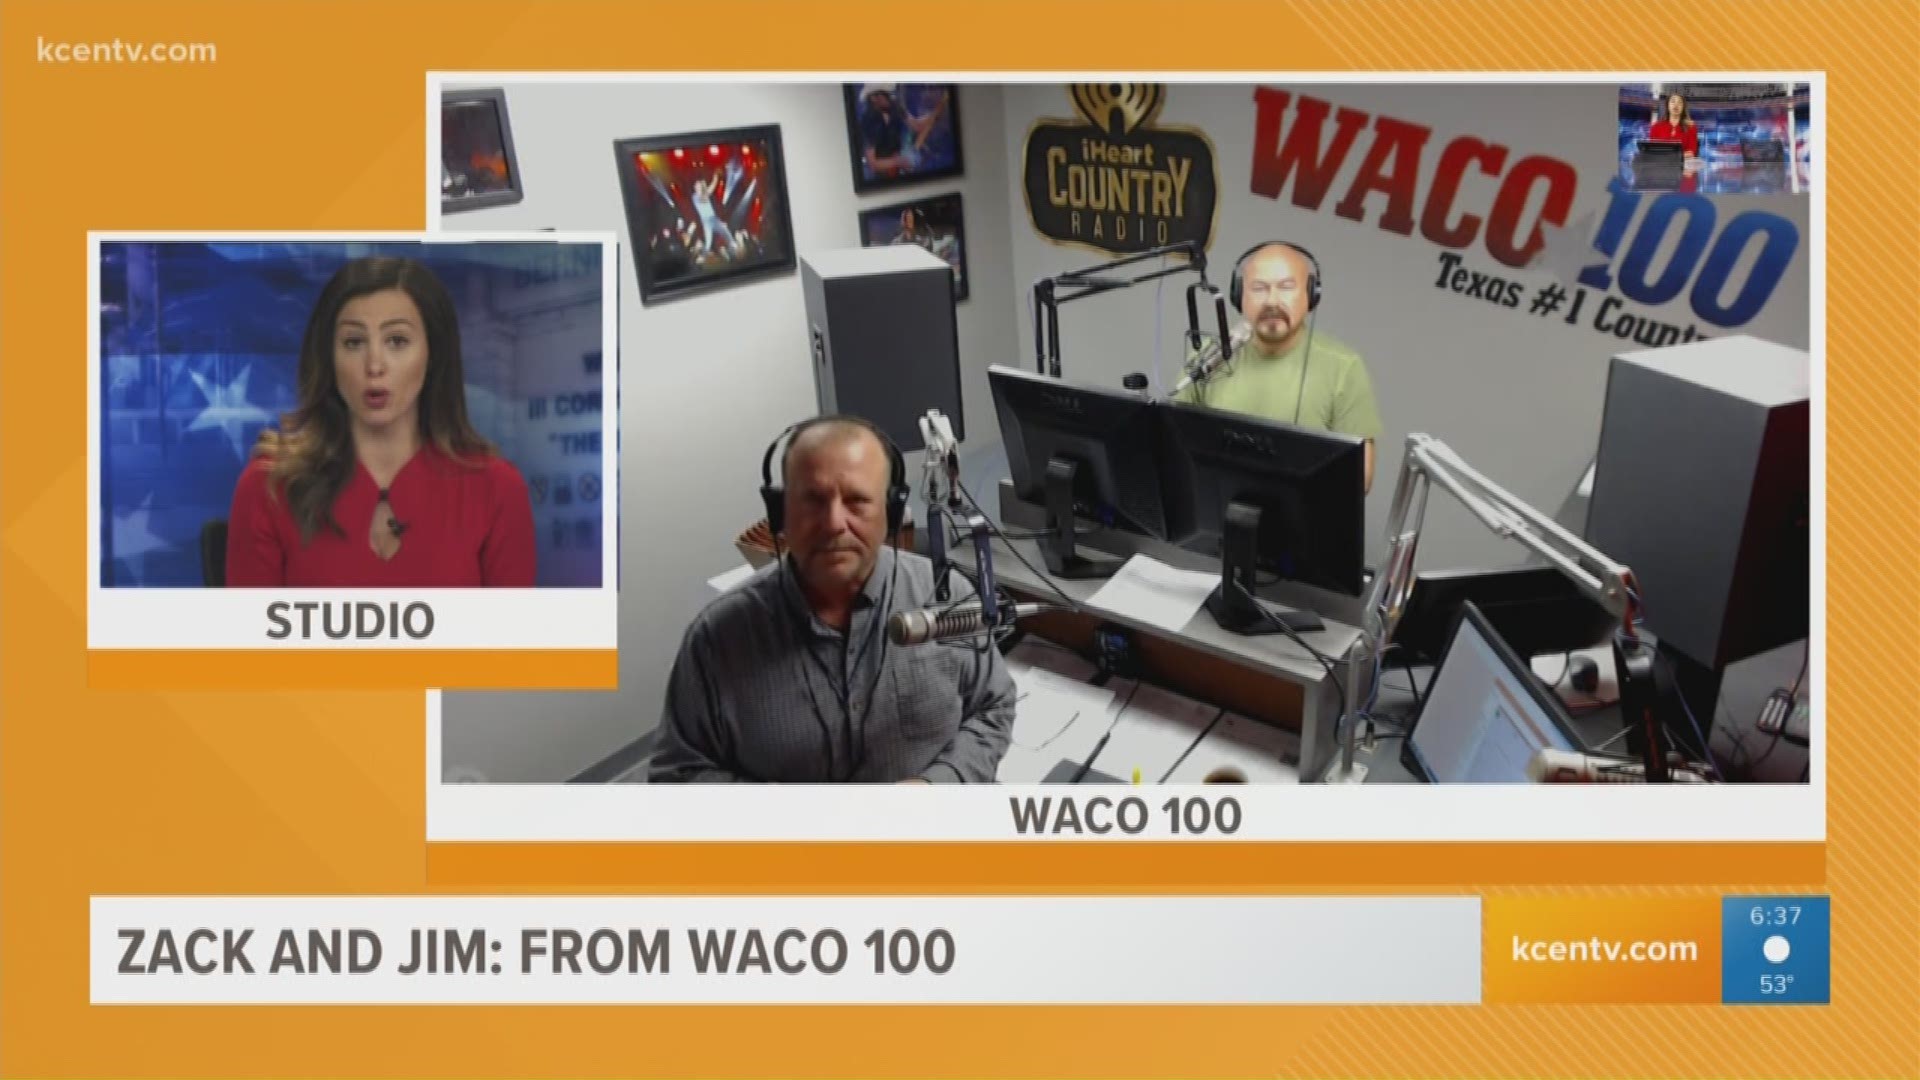 Zack and Jim from Waco 100 join Texas Today to talk Easter plans, high school reunions, and recovery efforts for Franklin, TX after an EF-3 tornado ripped through the town.